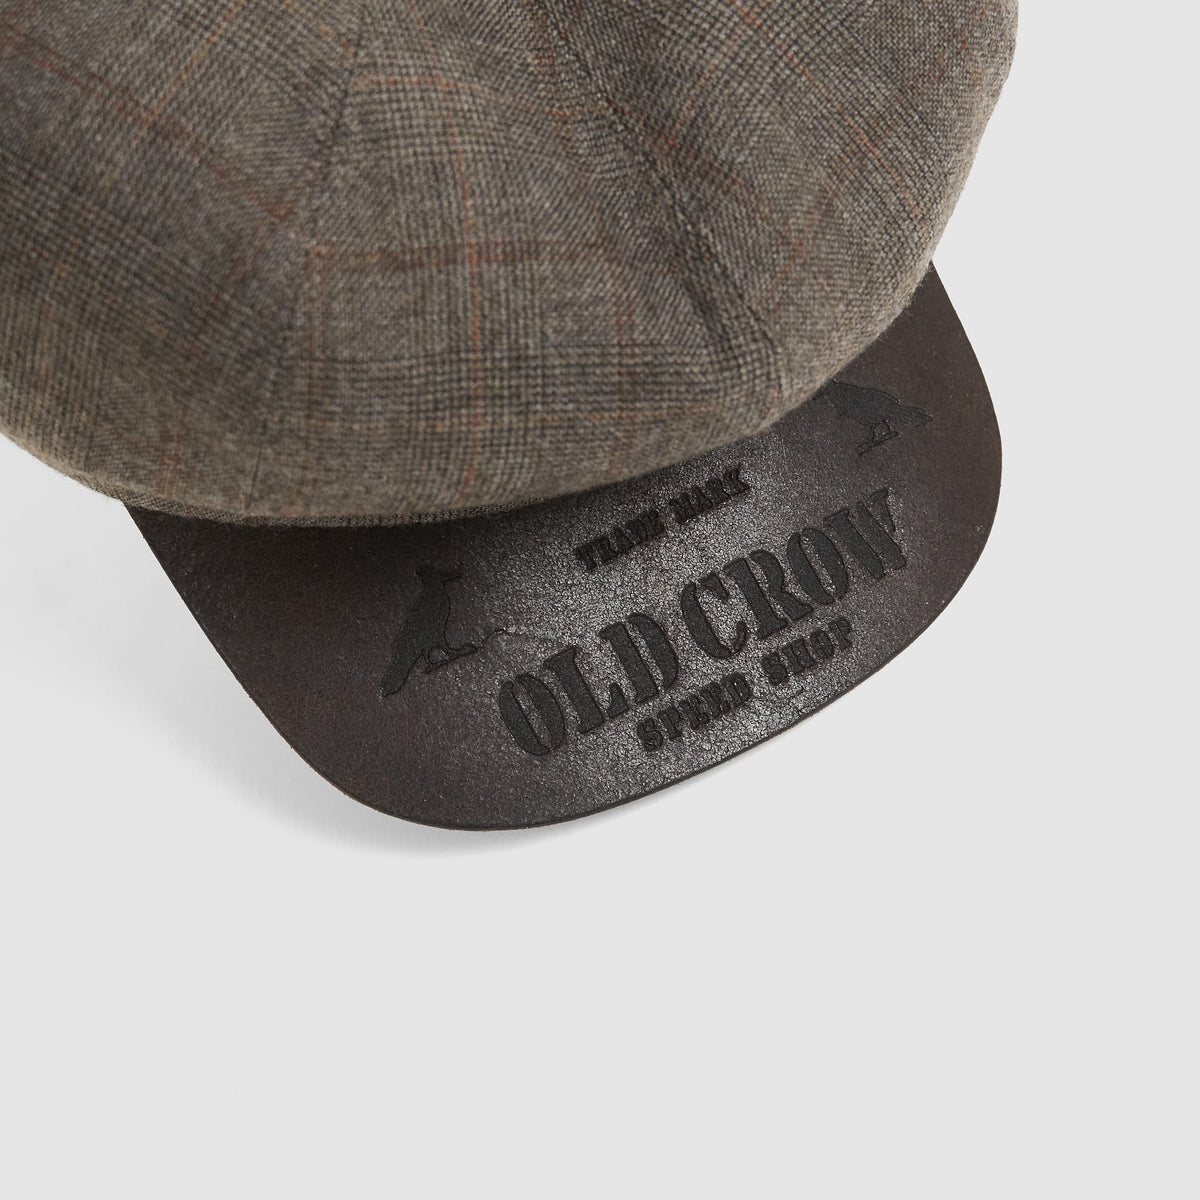 Old Crow Speed Shop by Glad Hand &amp; Co. News Boy Hat